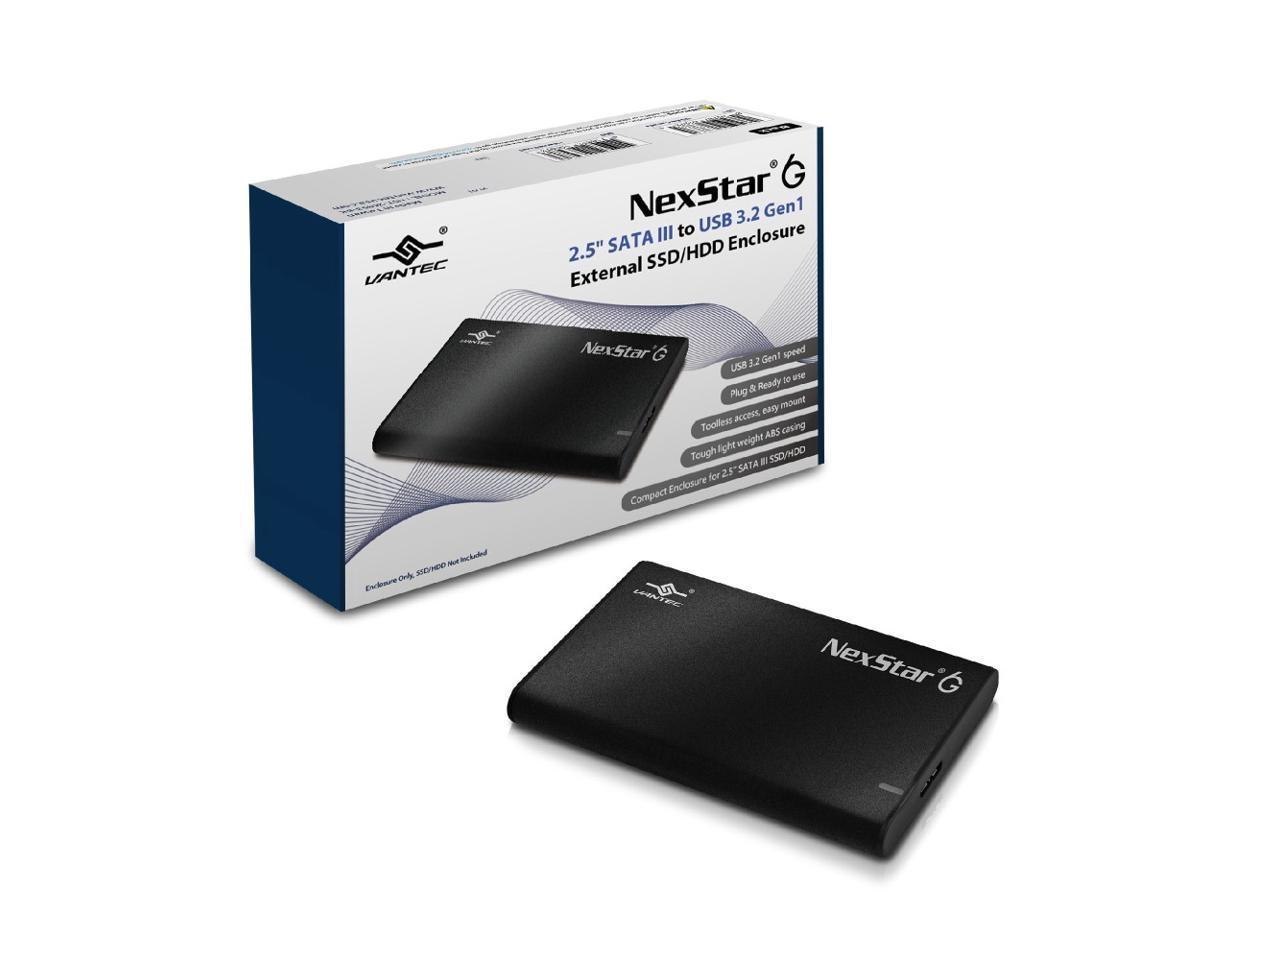 Vantec This Nexstar 6G Series, 2.5 Enclosure For Your SSD Or HDD. It Is Easy To Access